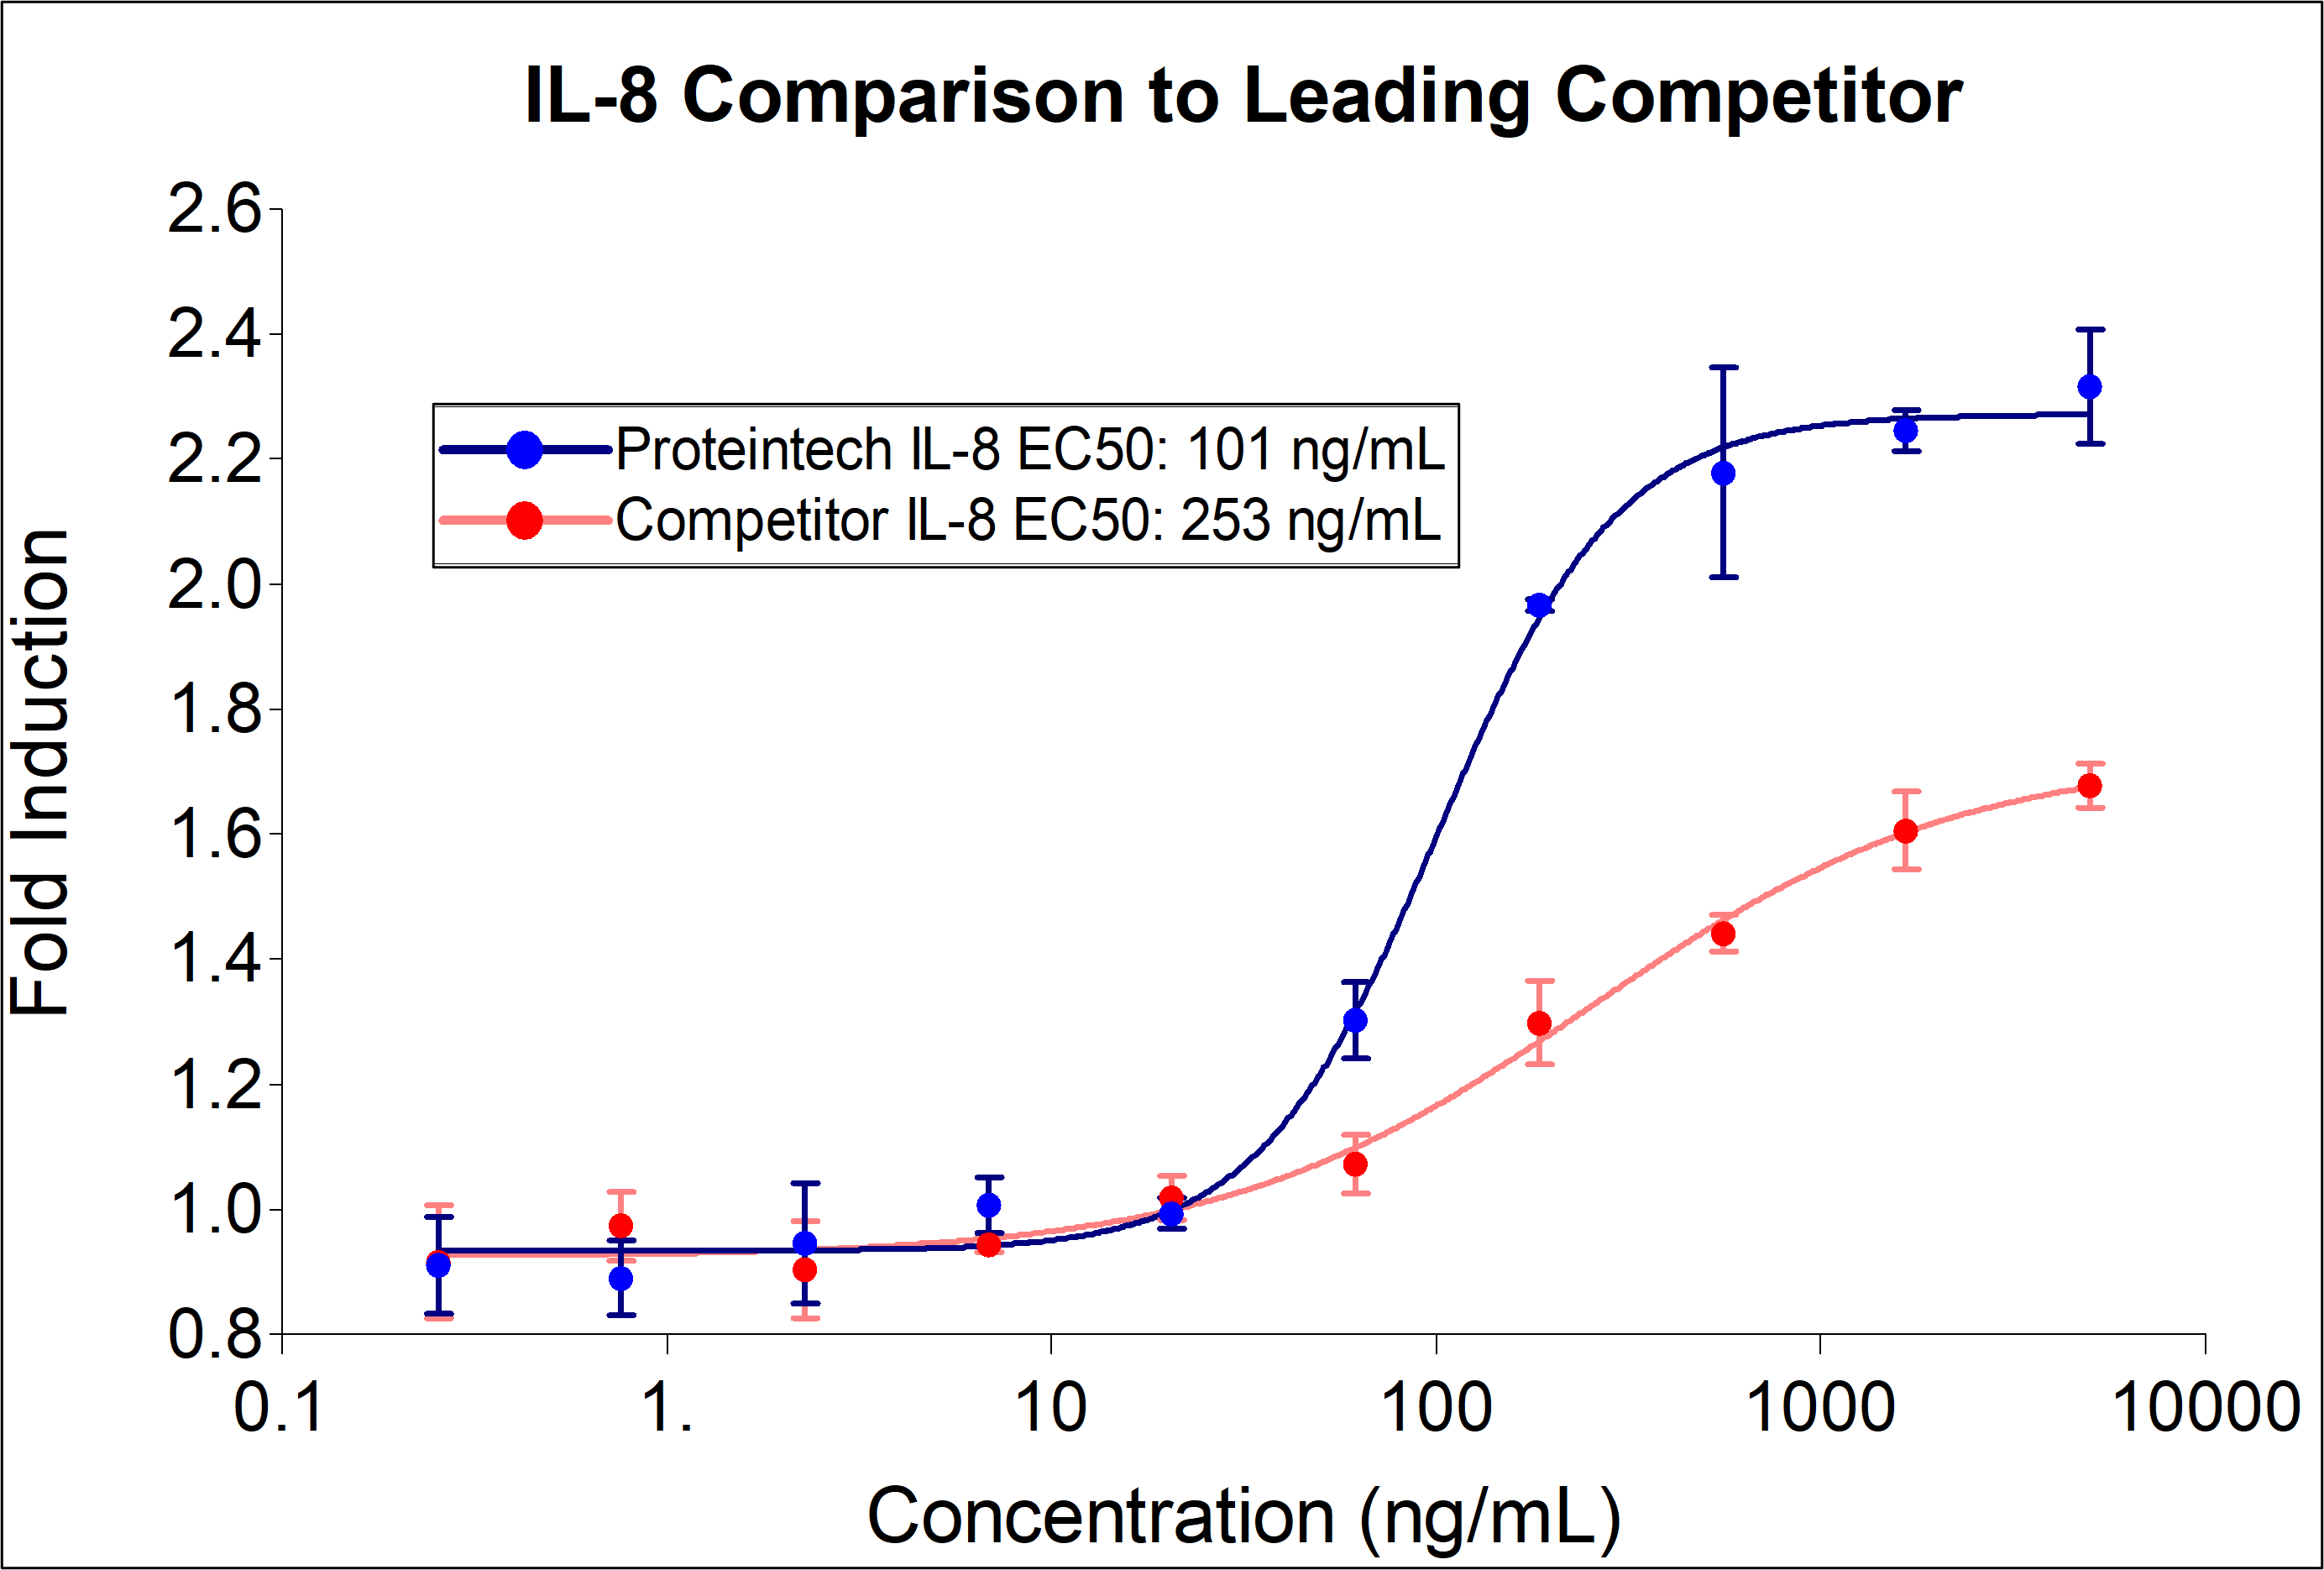 Proteintech IL-8 (HZ-1318) demonstrates a 2.5-fold decrease in EC50 and a greater fold induction compared to leading competitors. Recombinant human IL-8 stimulates dose-dependent proliferation of the THP-1 human monocyte cell line. Cell number was quantitatively assessed by PrestoBlue® Cell Viability Reagent. THP-1 cells were treated with increasing concentrations of recombinant IL-8 for 144 hours. The EC50 was determined using a 4-parameter non-linear regression model. The EC50 range is 100-500 ng/mL.